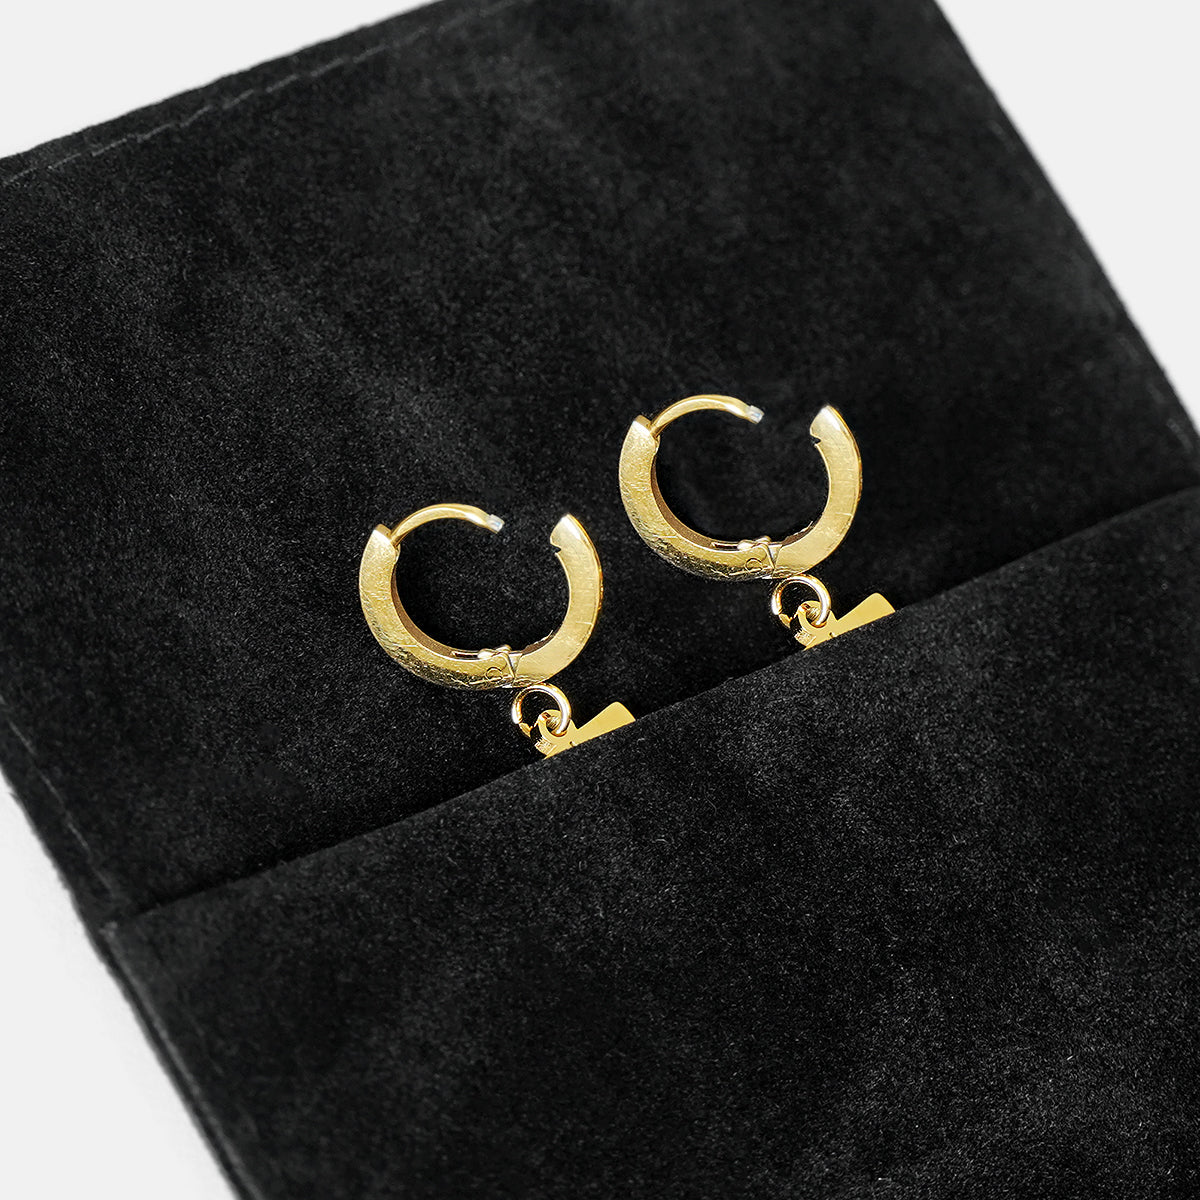 61 Number Earring - Gold Plated Stainless Steel